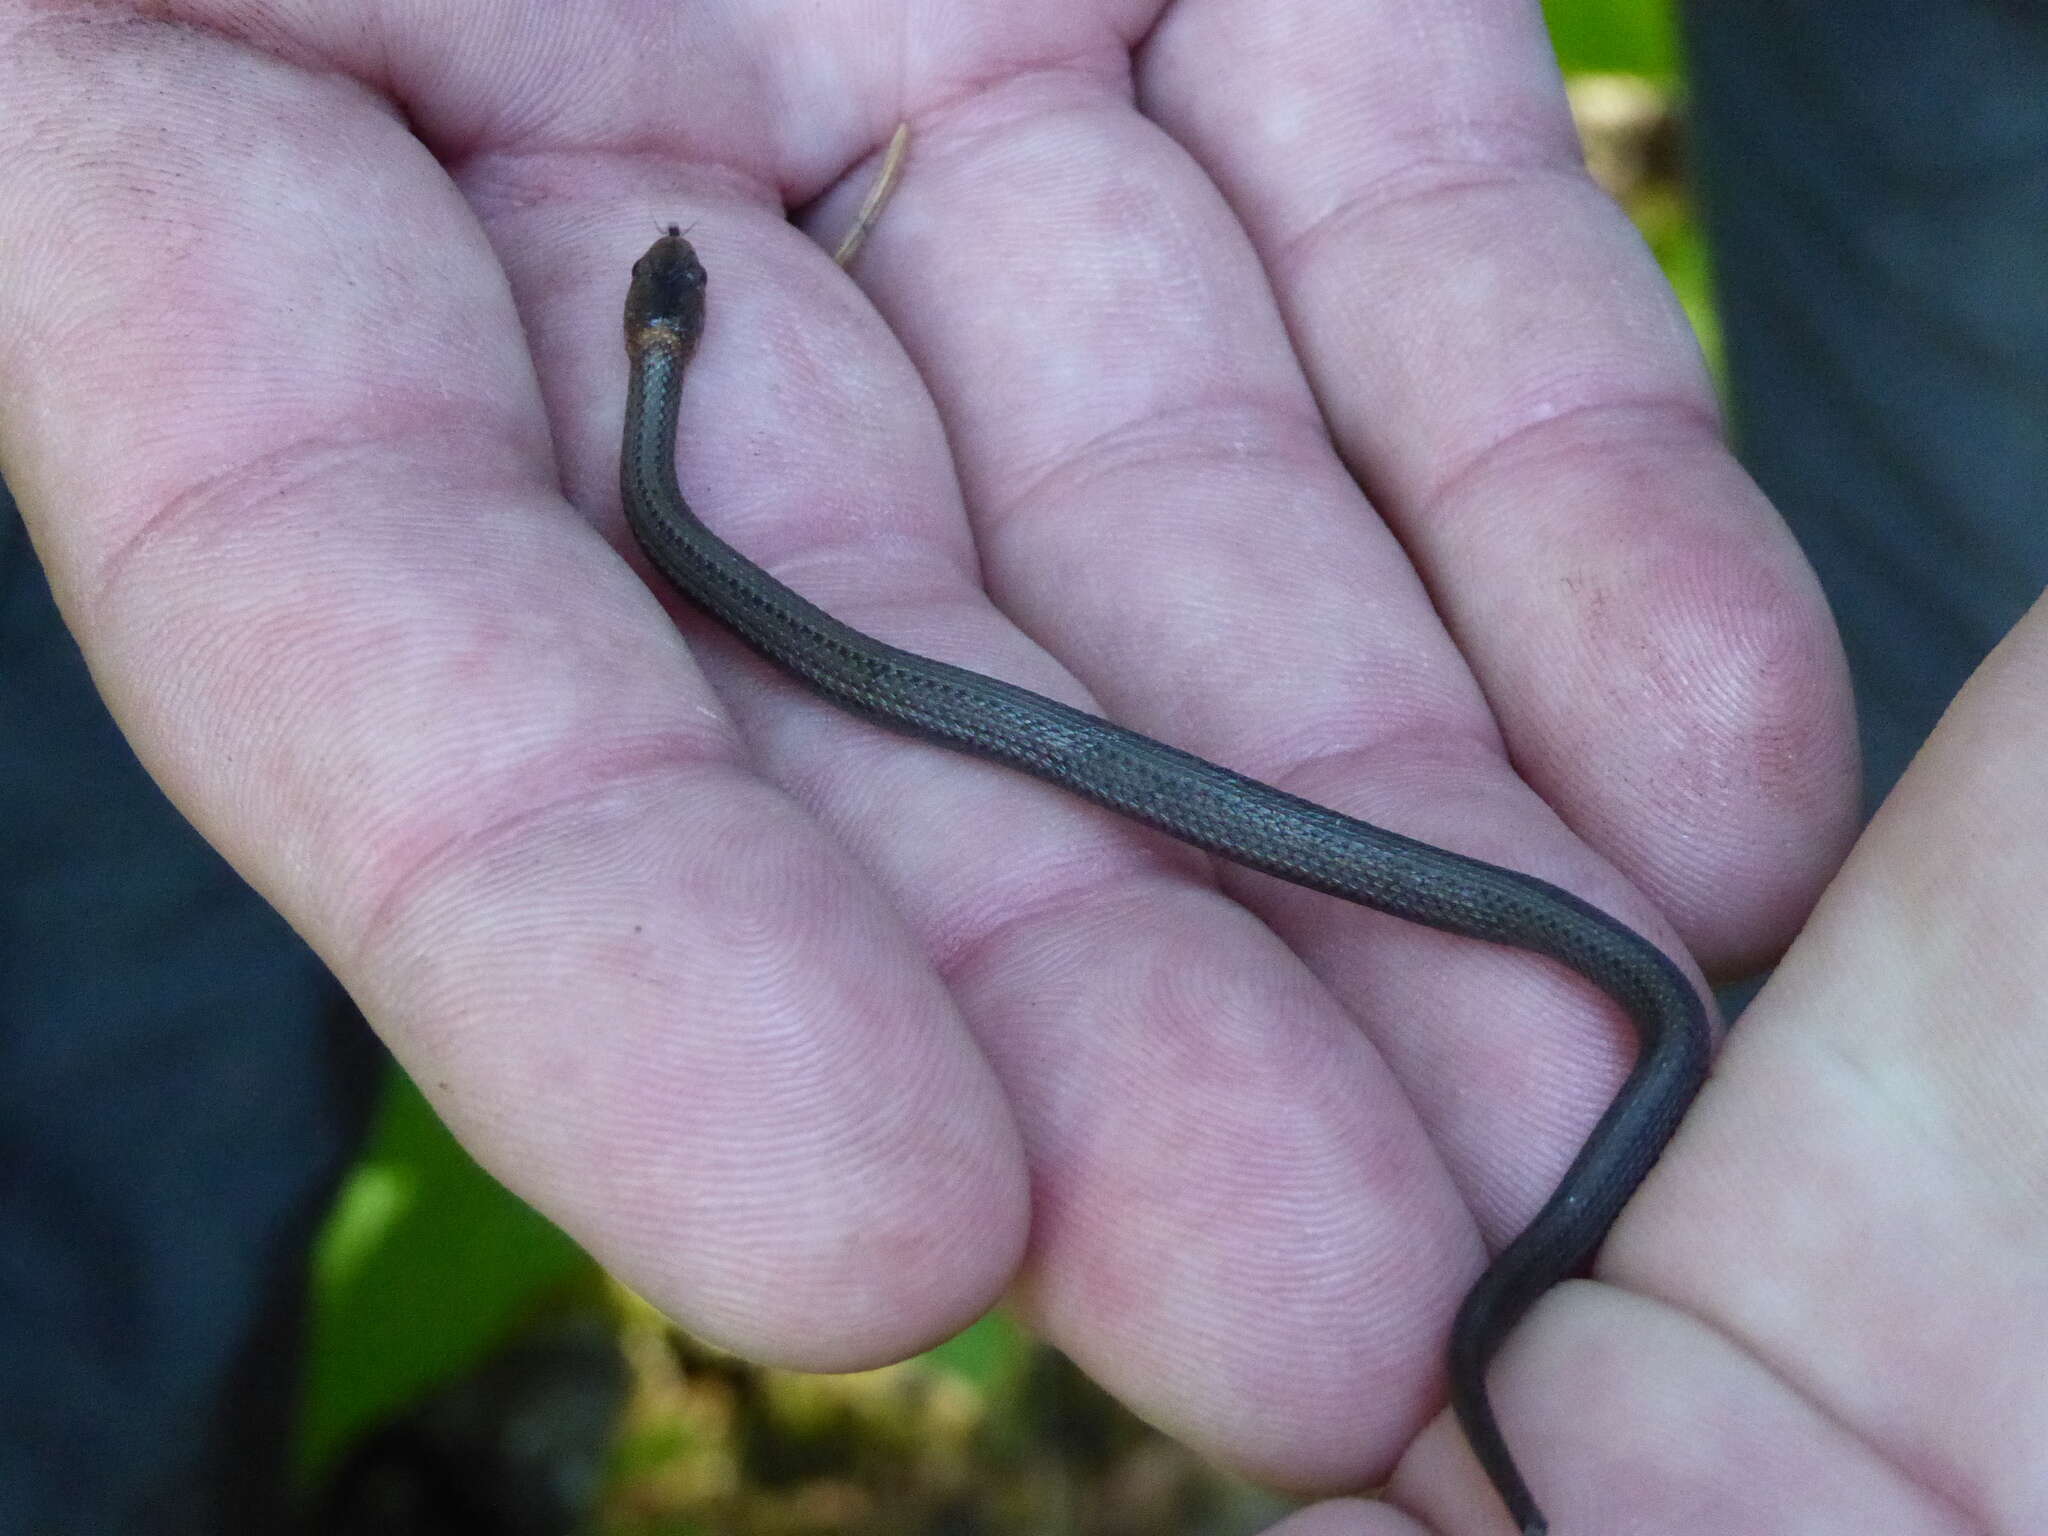 Image of Northern redbelly snake